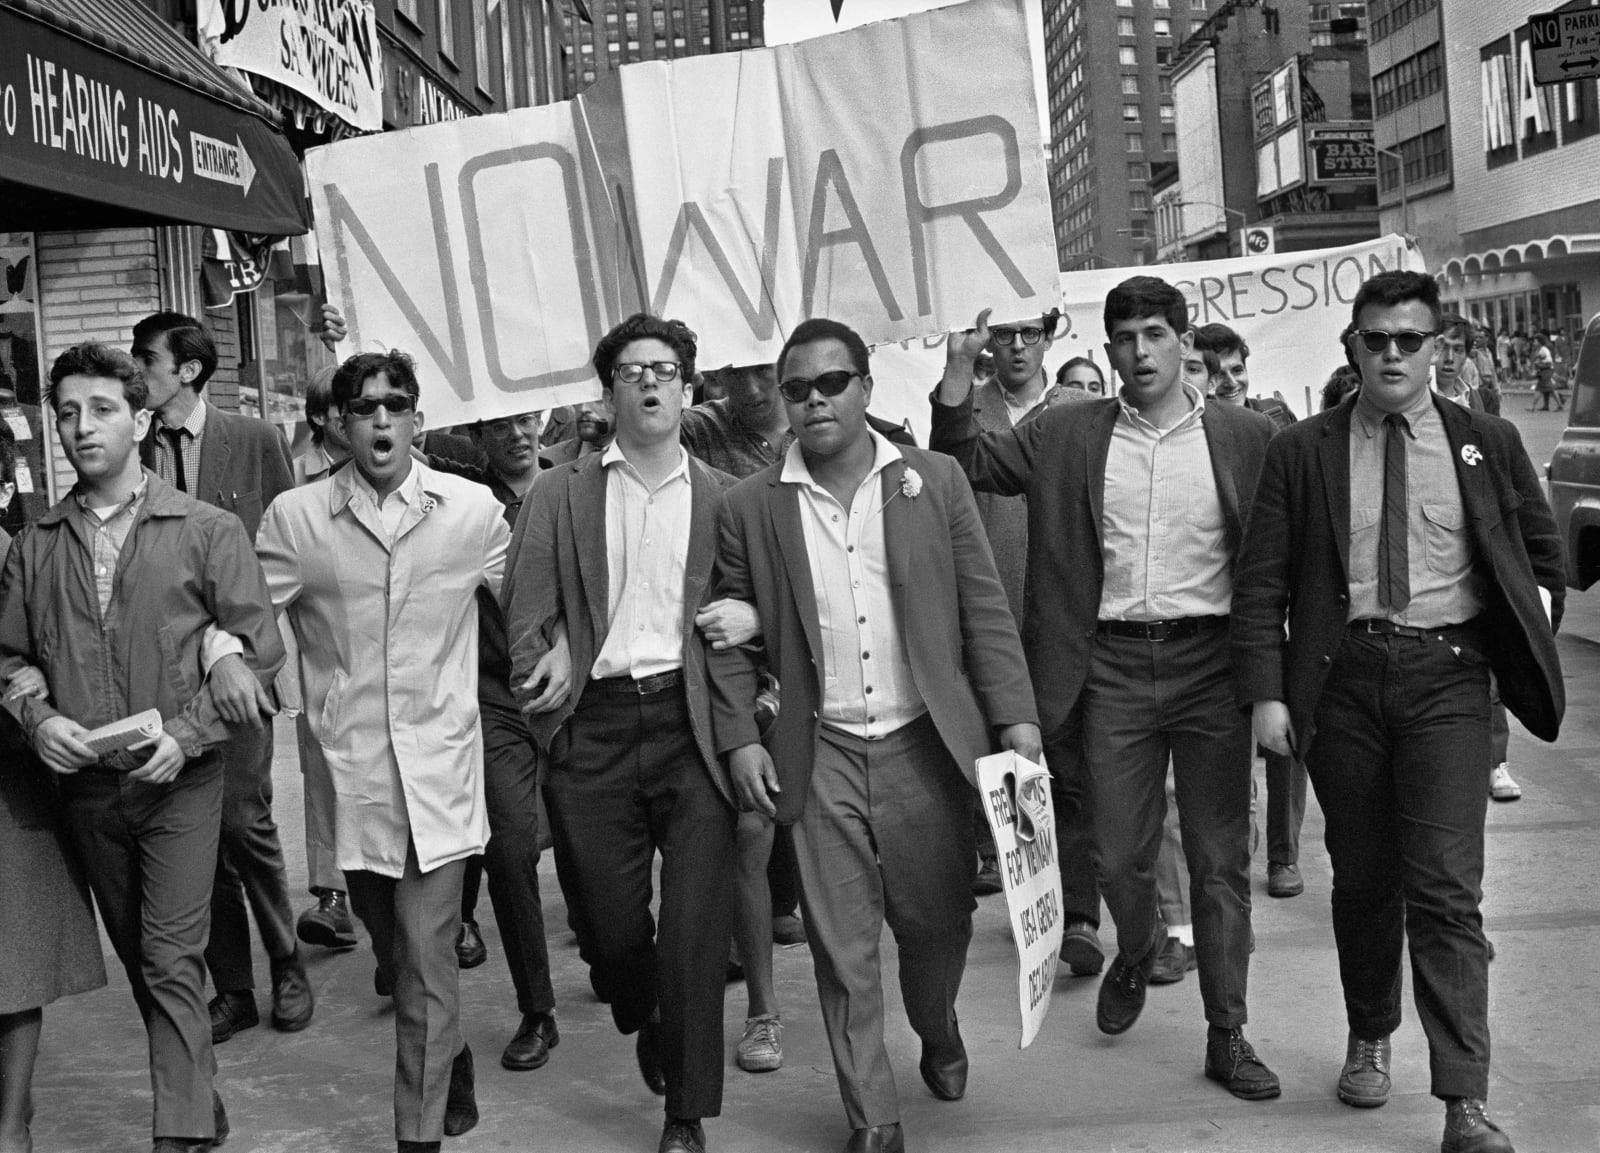 Builder Levy, NO WAR, near Union Square. NYC, May 1, , 1965